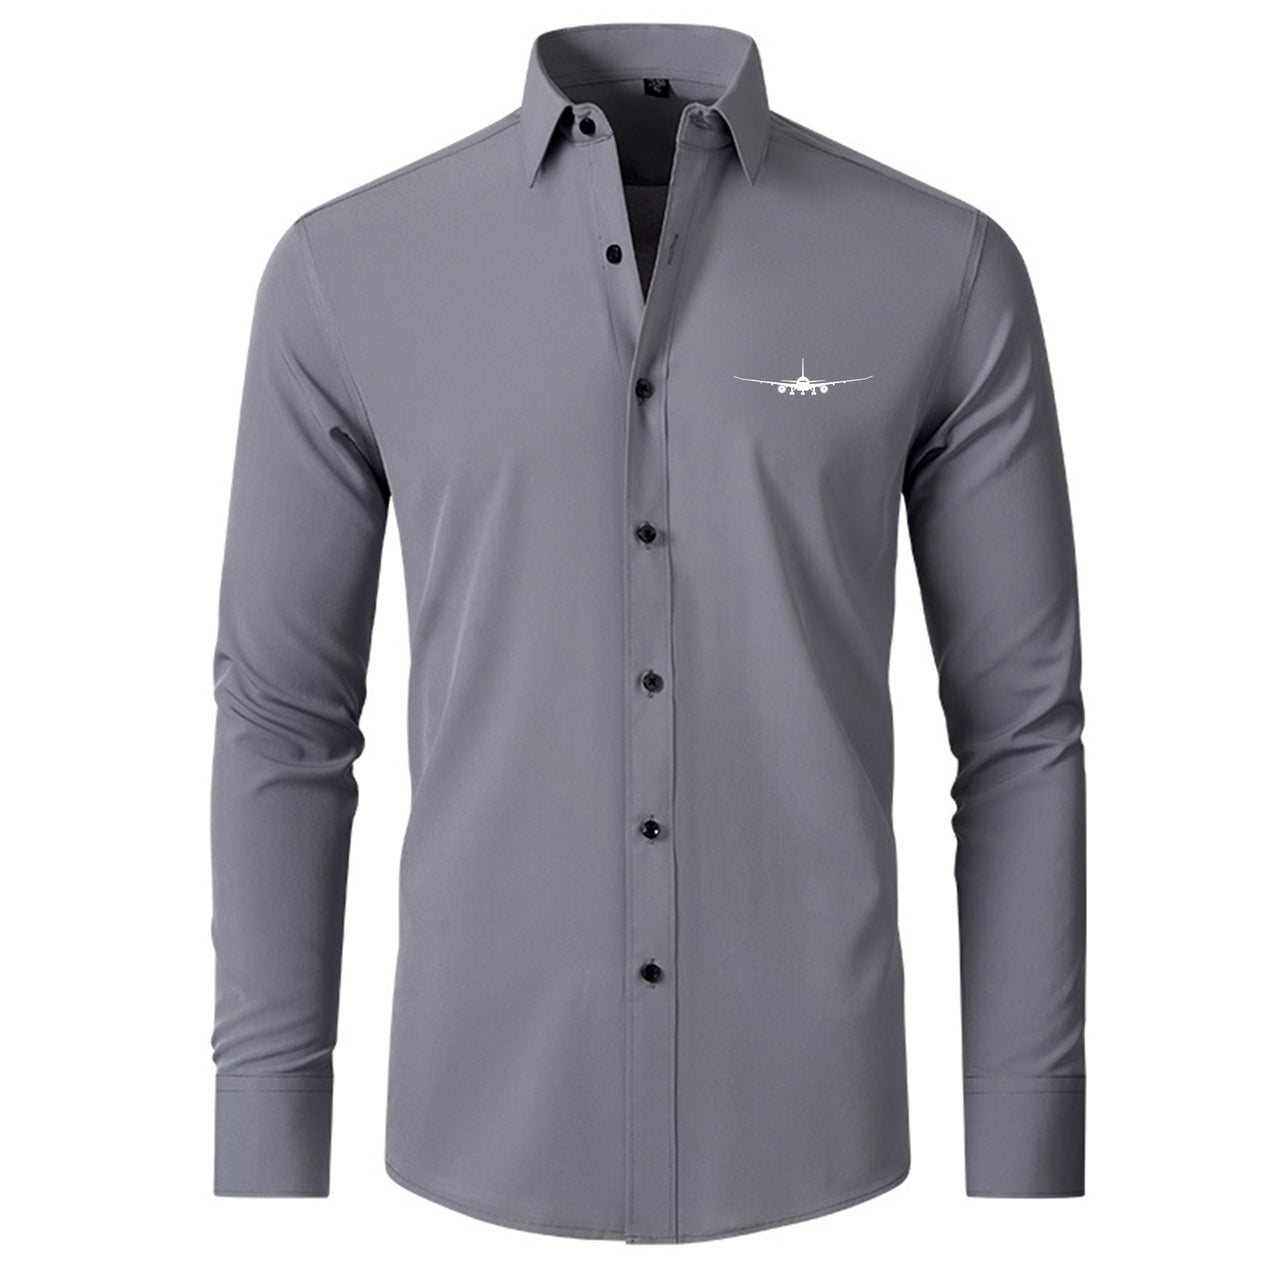 Boeing 787 Silhouette Designed Long Sleeve Shirts